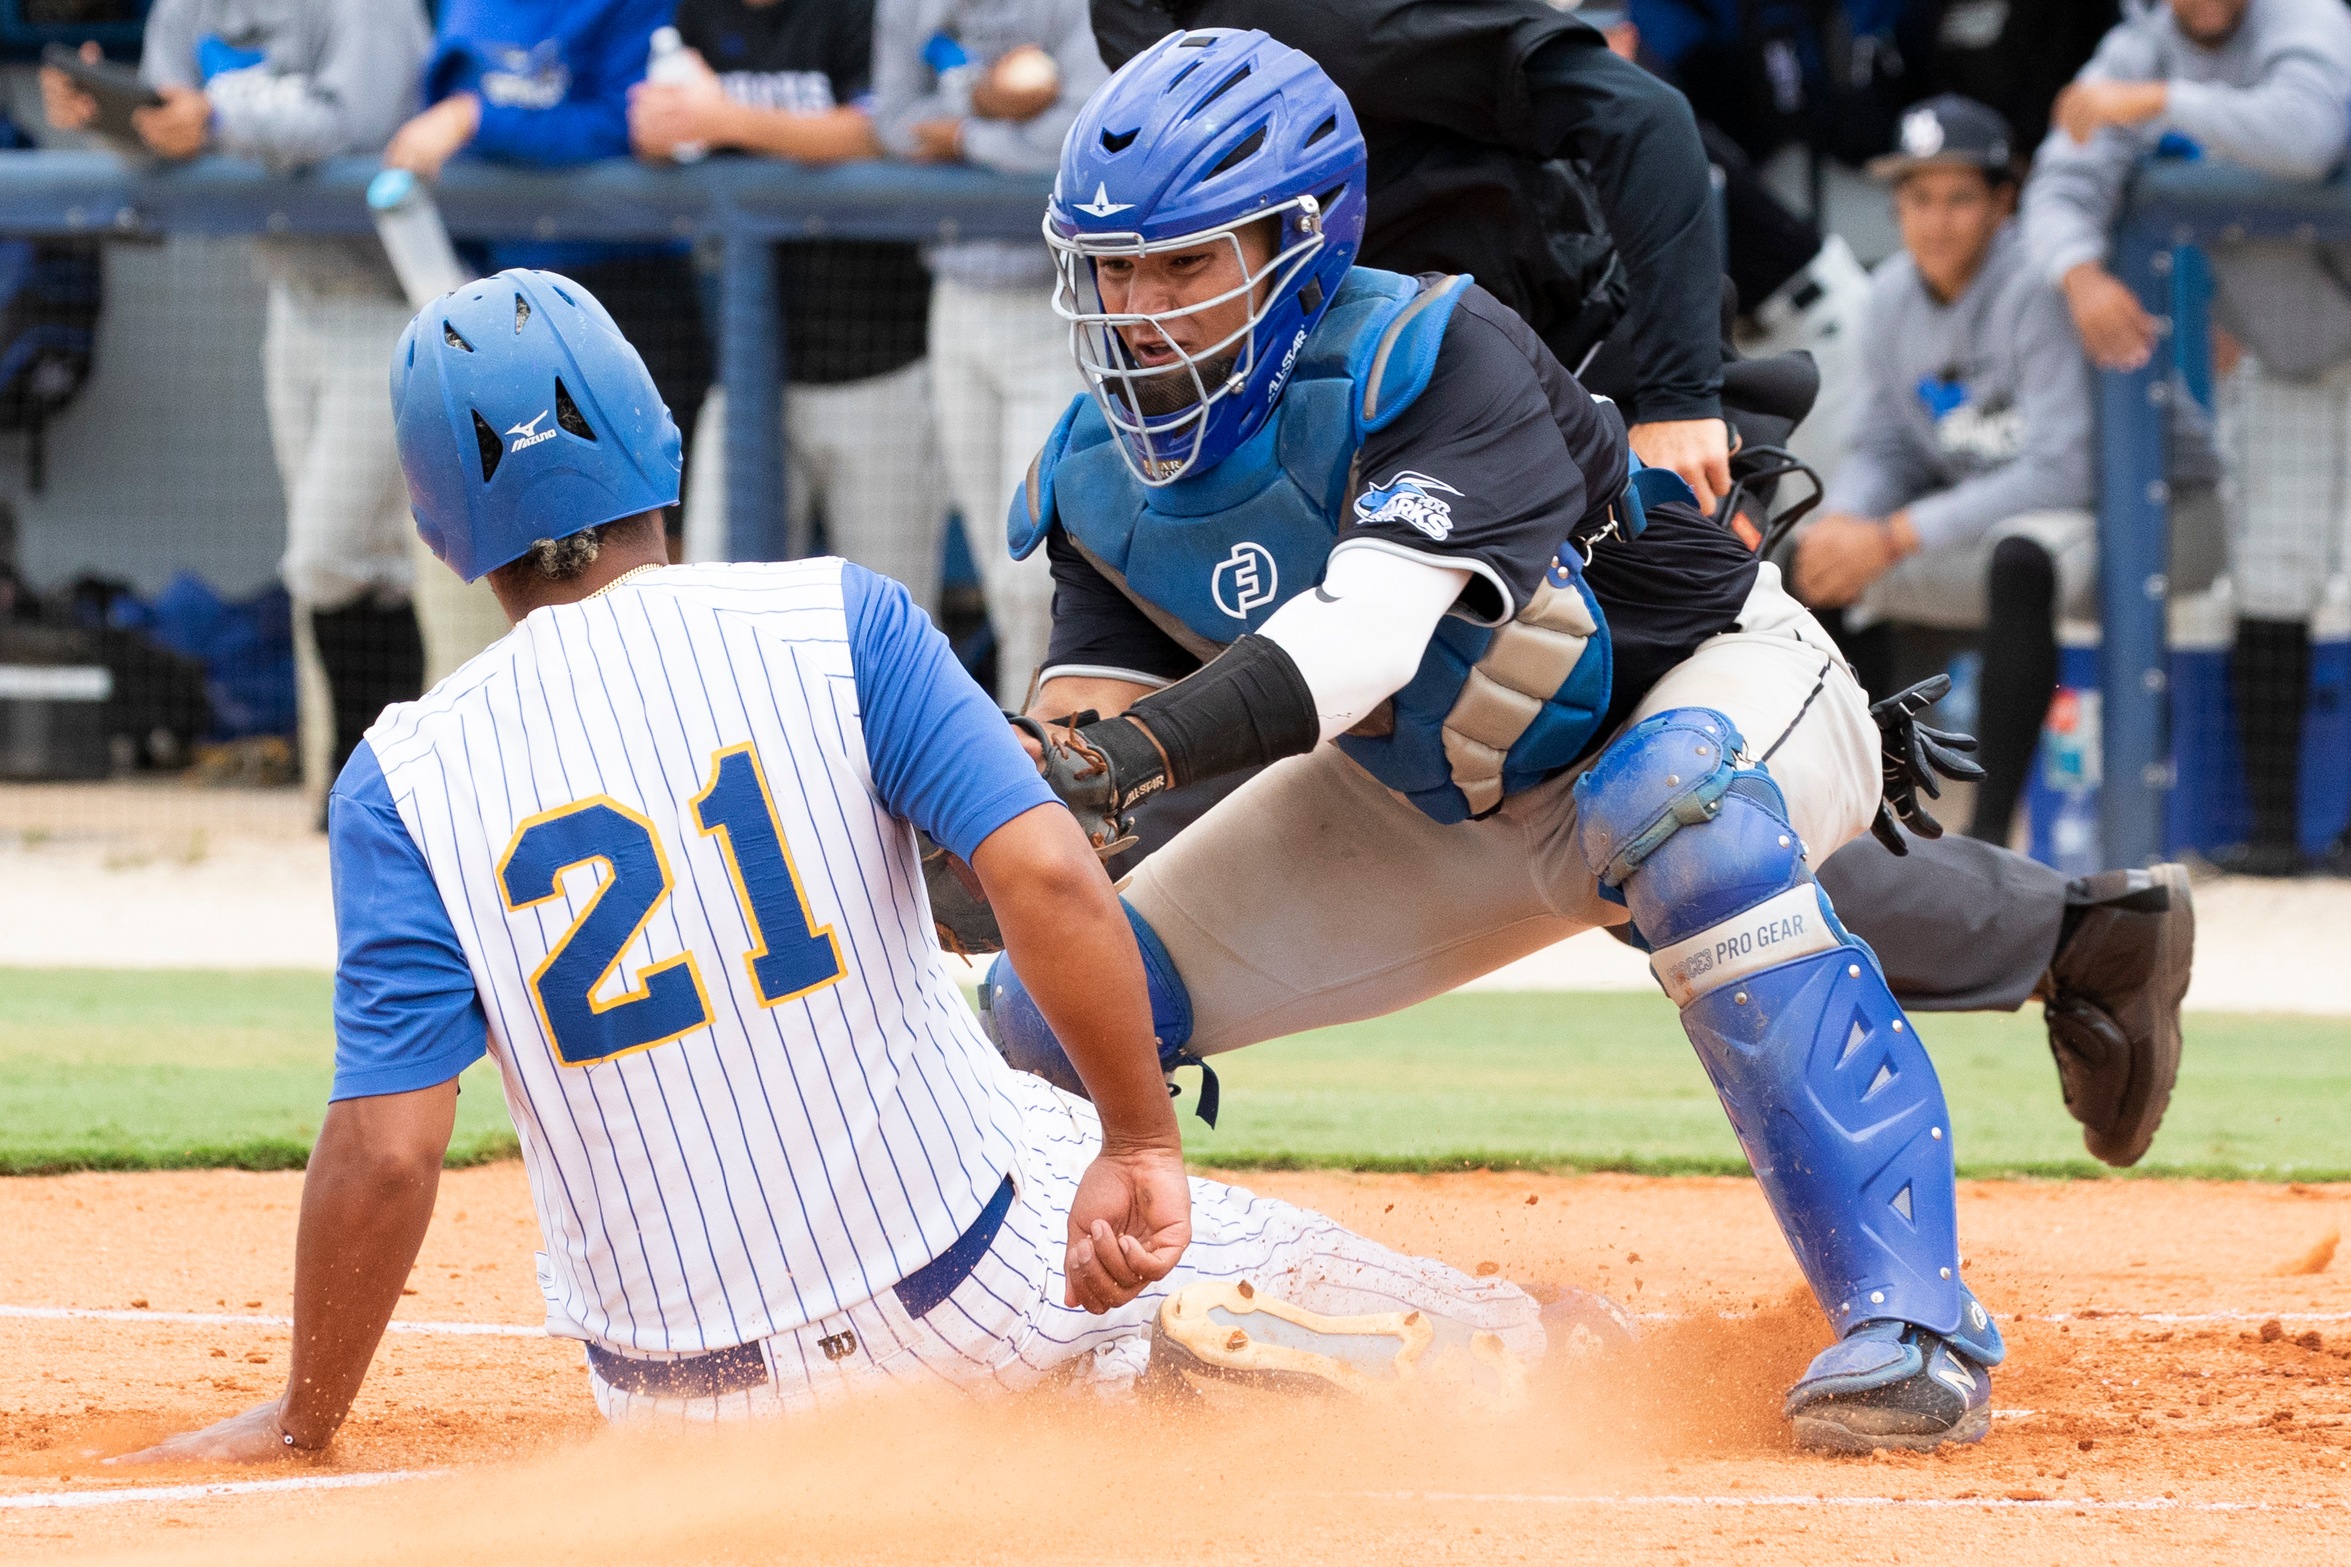 Indian River State College Pioneers Claims Lead in Sixth Inning to Defeat Eastern State College